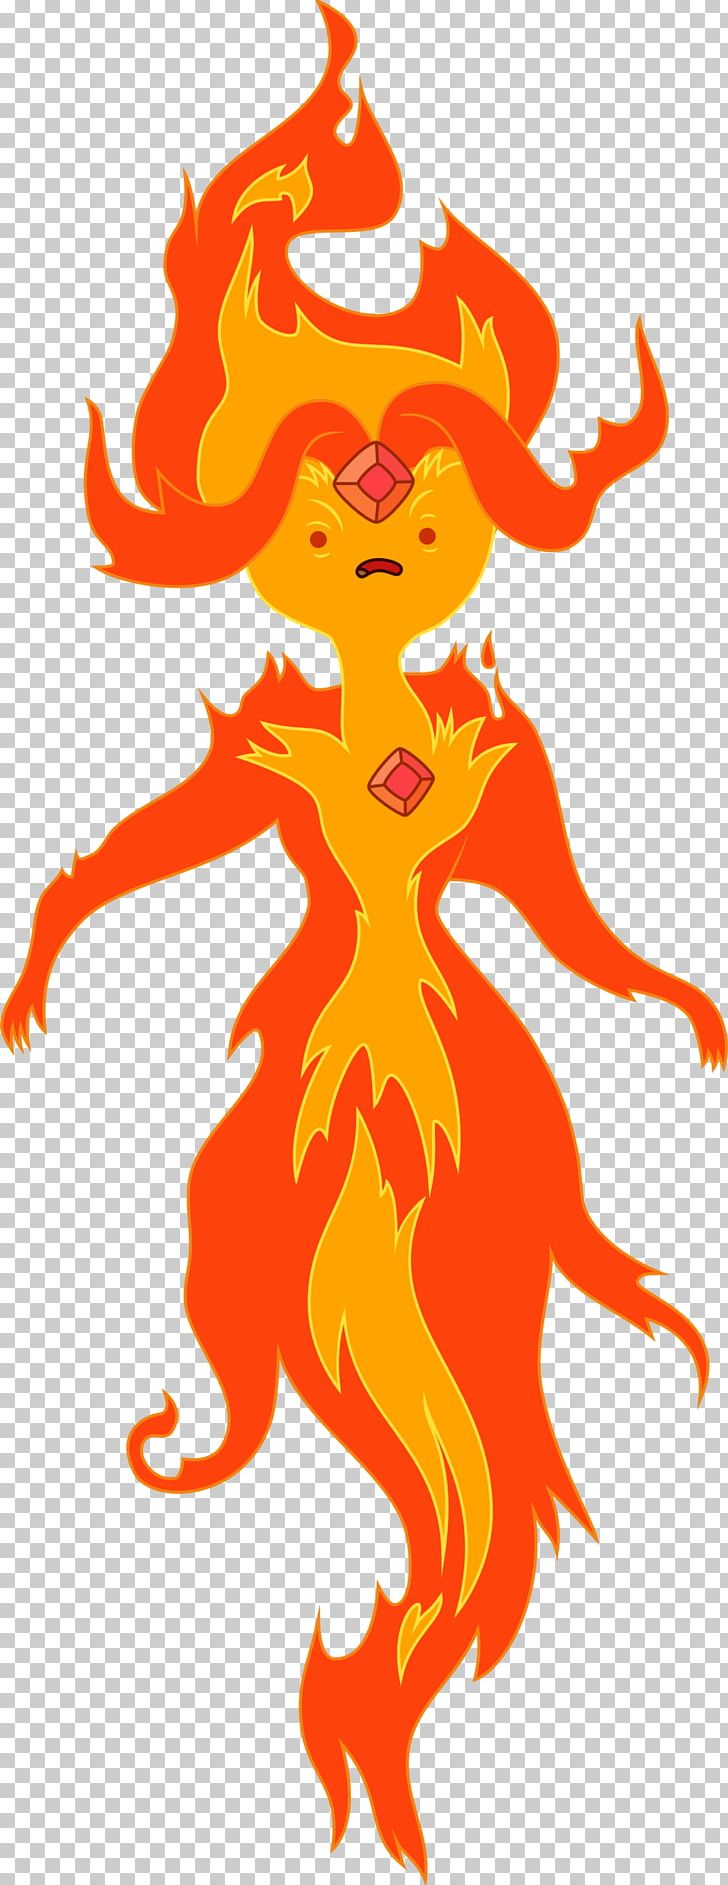 Finn The Human Flame Princess Ice King Sticker PNG, Clipart, Adventure, Adventure Time, Adventure Time Season 6, Animation, Art Free PNG Download